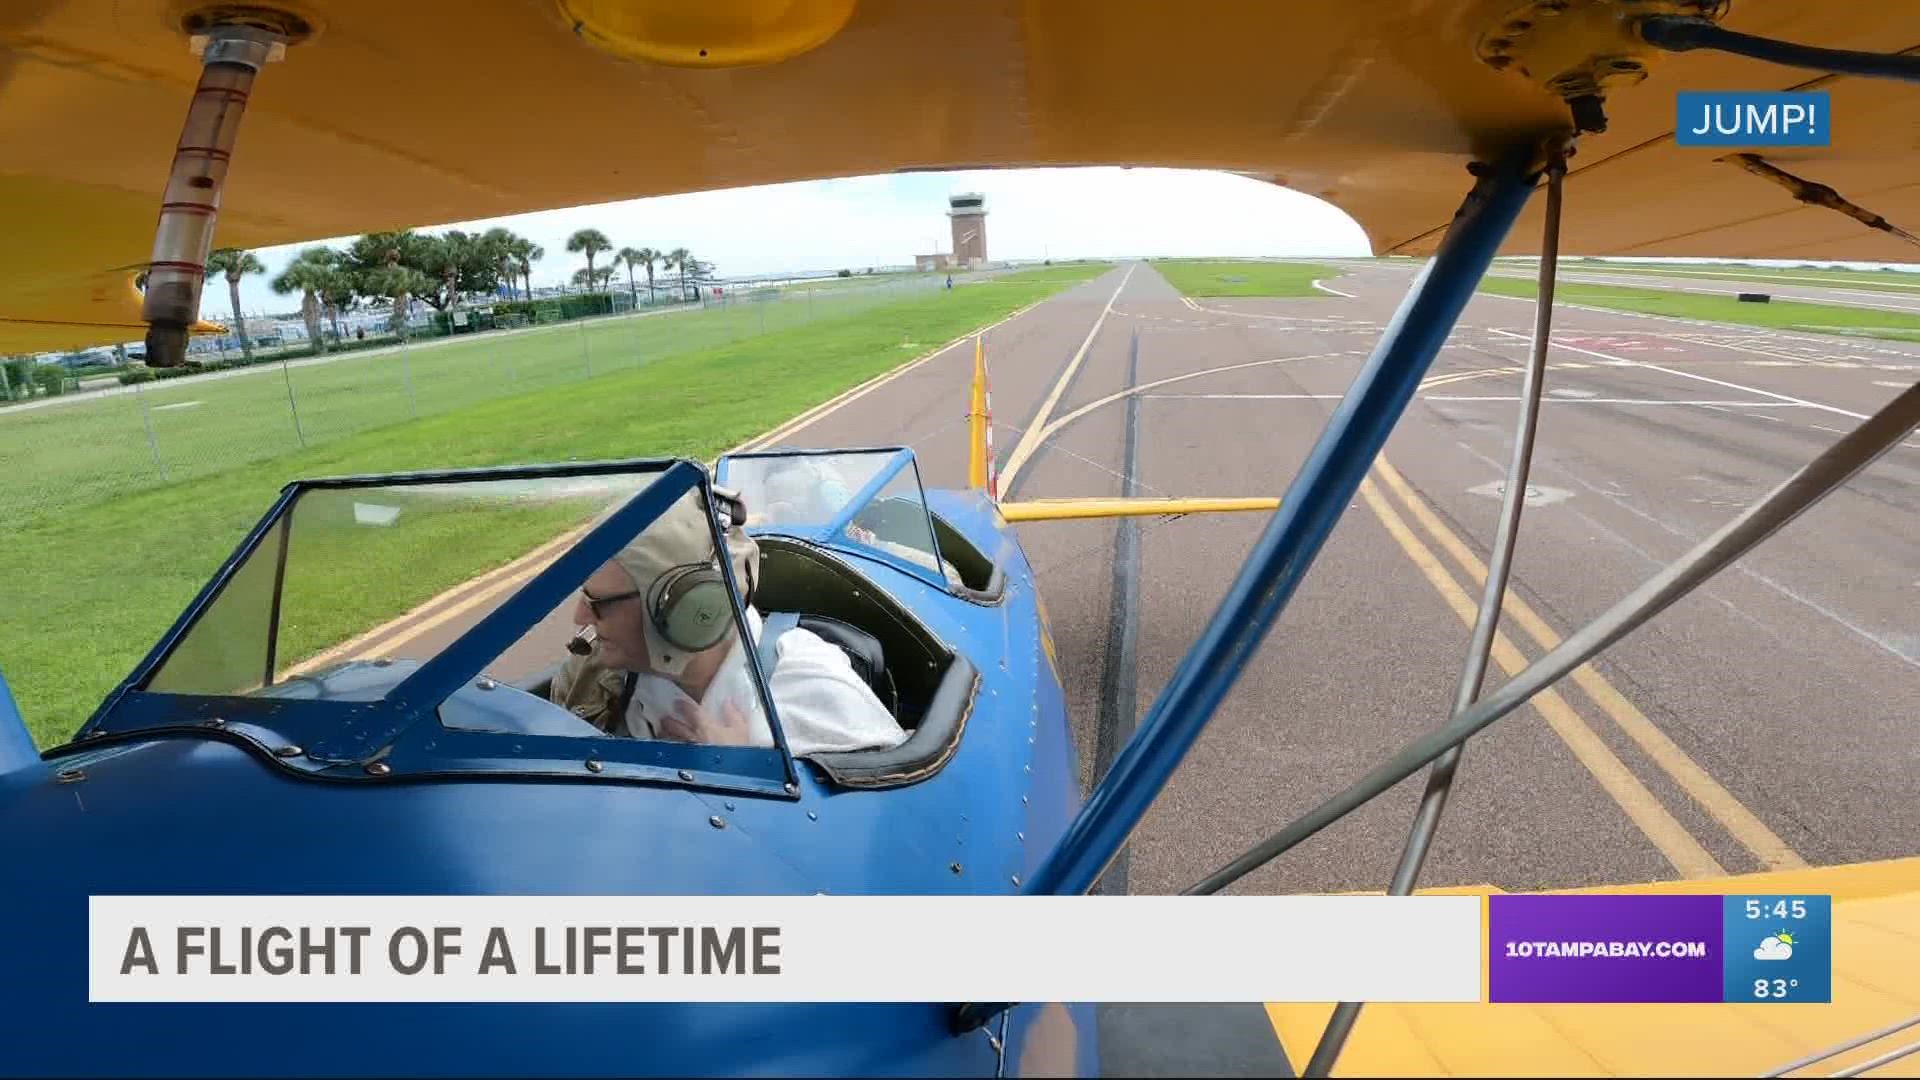 A Clearwater woman got the chance to check off something that's been on her bucket list: taking a ride in a World War II biplane.